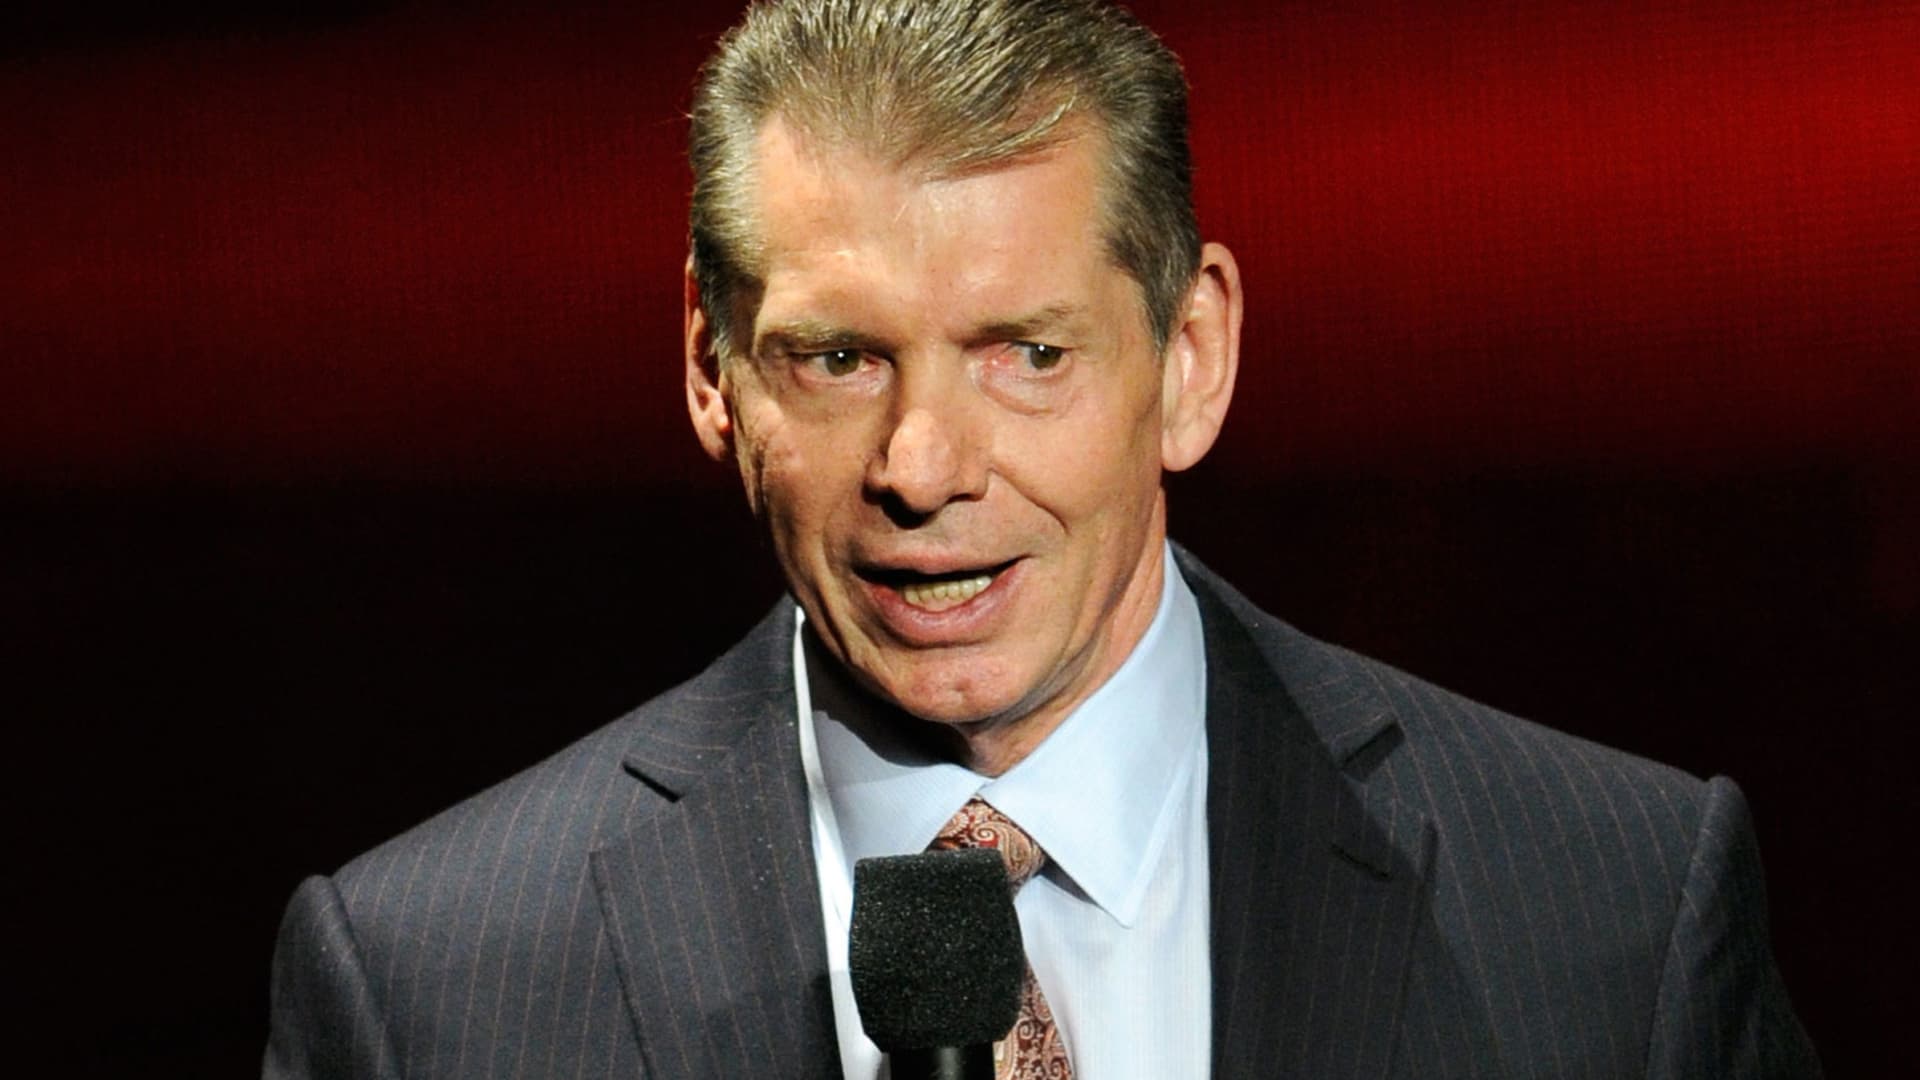 WWE boss Vince McMahon steps back from CEO duties during misconduct probe